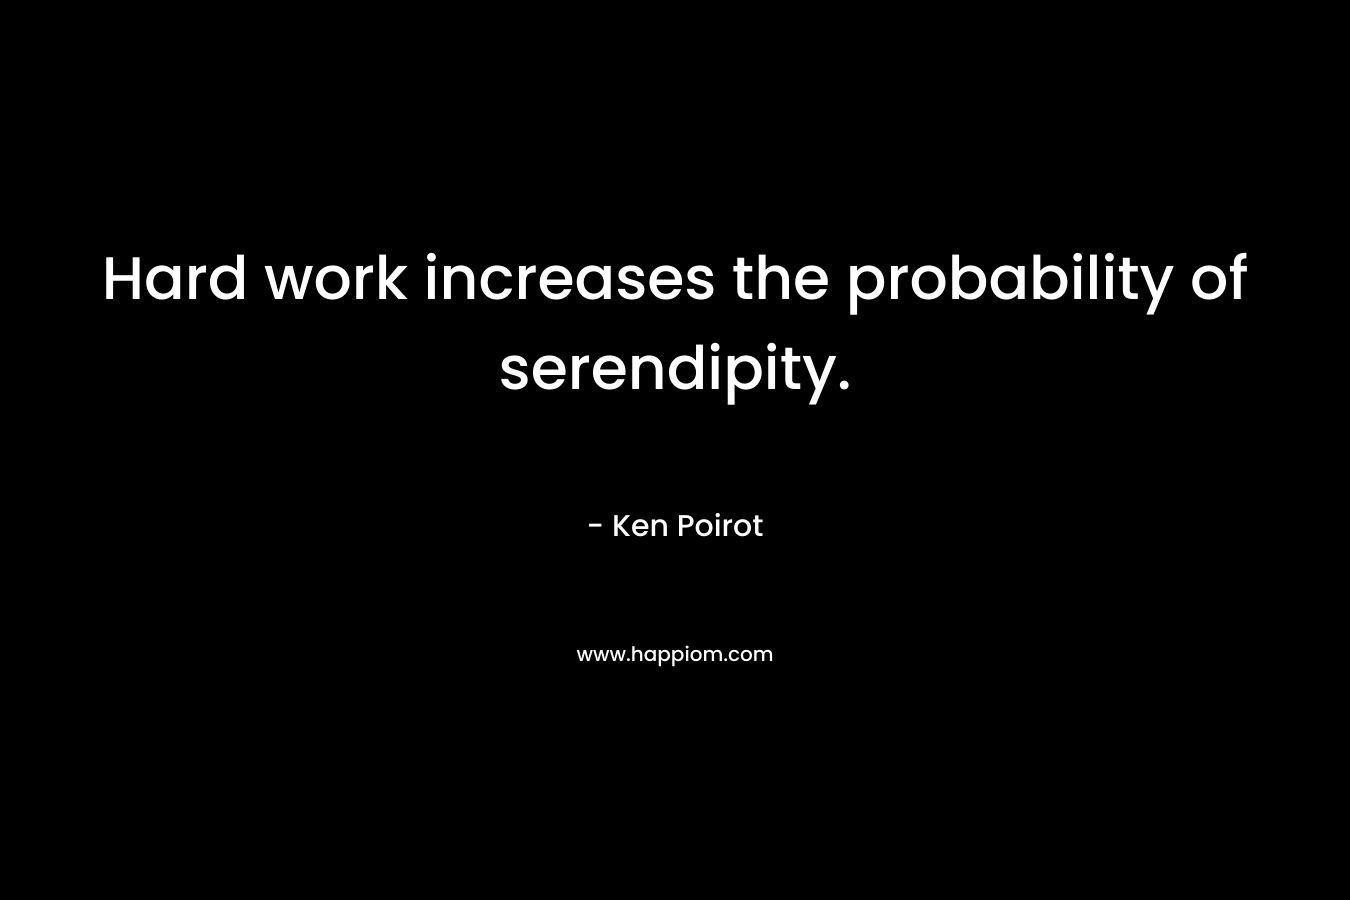 Hard work increases the probability of serendipity.